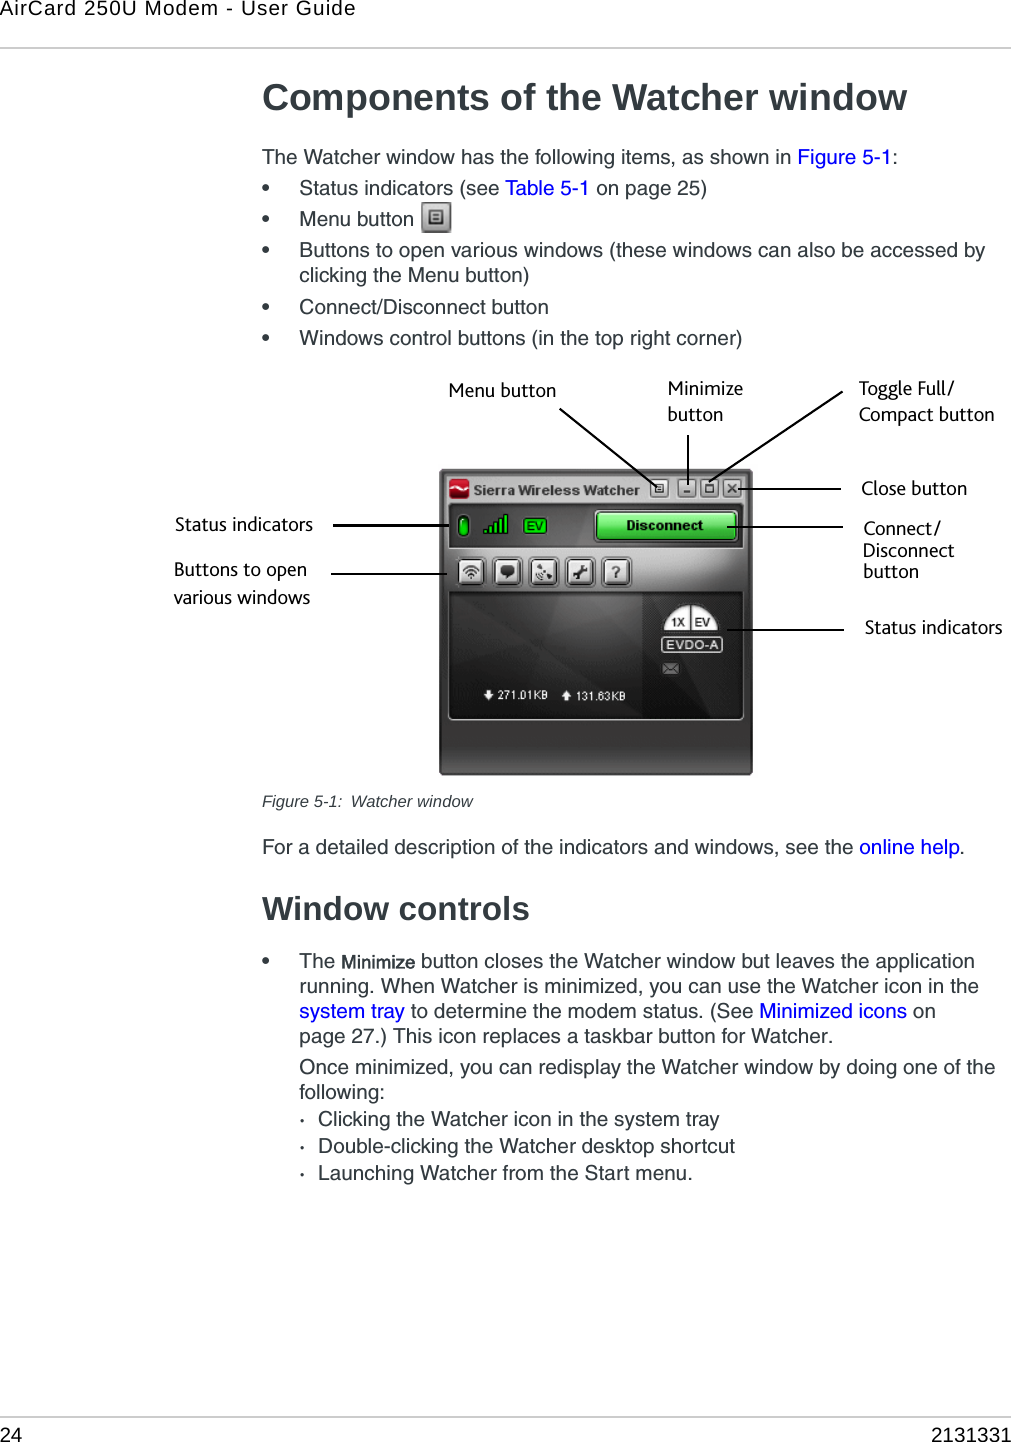 AirCard 250U Modem - User Guide24 2131331Components of the Watcher windowThe Watcher window has the following items, as shown in Figure 5-1:•Status indicators (see Tabl e 5 - 1  on page 25)•Menu button •Buttons to open various windows (these windows can also be accessed by clicking the Menu button)•Connect/Disconnect button•Windows control buttons (in the top right corner)Figure 5-1: Watcher windowFor a detailed description of the indicators and windows, see the online help.Window controls•The Minimize button closes the Watcher window but leaves the application running. When Watcher is minimized, you can use the Watcher icon in the system tray to determine the modem status. (See Minimized icons on page 27.) This icon replaces a taskbar button for Watcher.Once minimized, you can redisplay the Watcher window by doing one of the following:·Clicking the Watcher icon in the system tray·Double-clicking the Watcher desktop shortcut·Launching Watcher from the Start menu.Toggle Full/Close buttonMinimizeMenu buttonbuttonDisconnectConnect/ button Compact buttonButtons to openvarious windowsStatus indicatorsStatus indicators